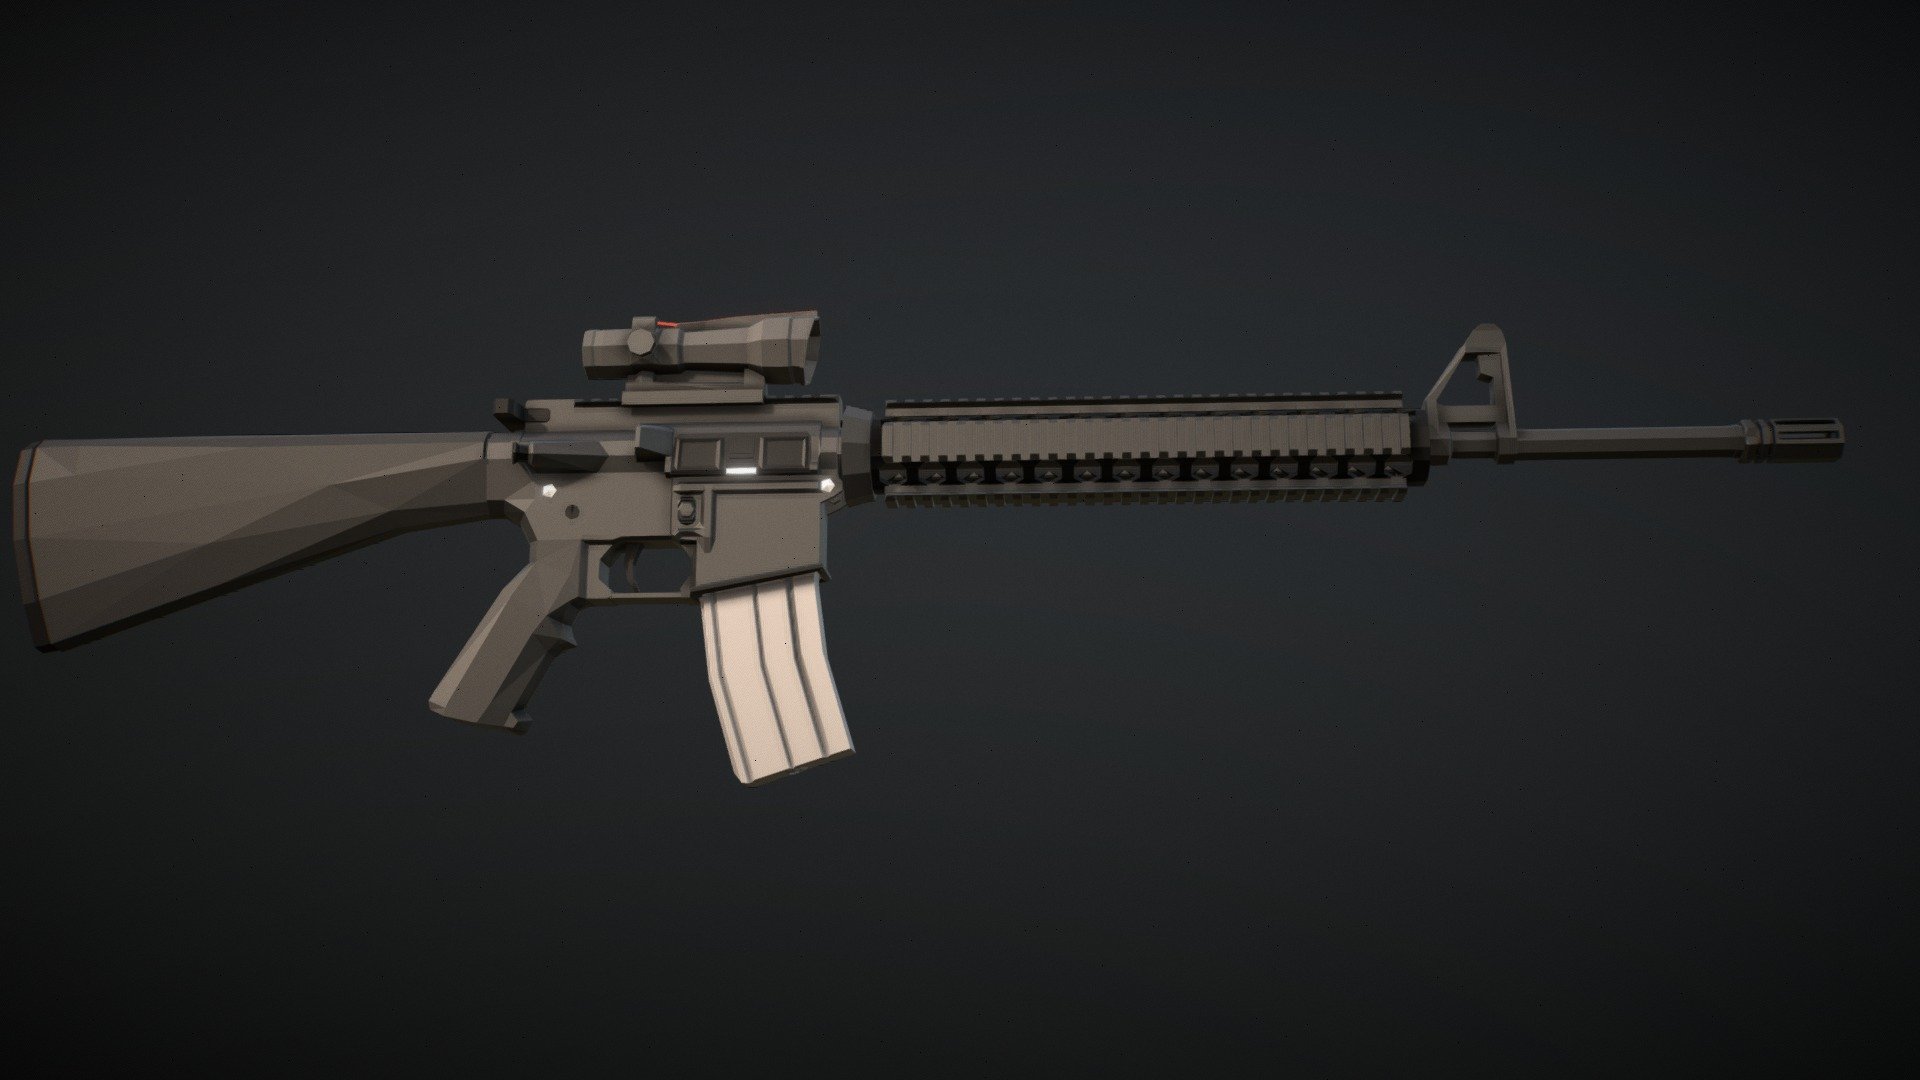 M16A4 with the M5 RAS Picatinny railed hand guard upgrade/update as well as the 4x magnification ACOG combat sight. included is also the aiming reticle from inside the sight, once inside and once larger and floating above the weapon - Low-Poly M16A4 ACOG - Download Free 3D model by notcplkerry 3d model